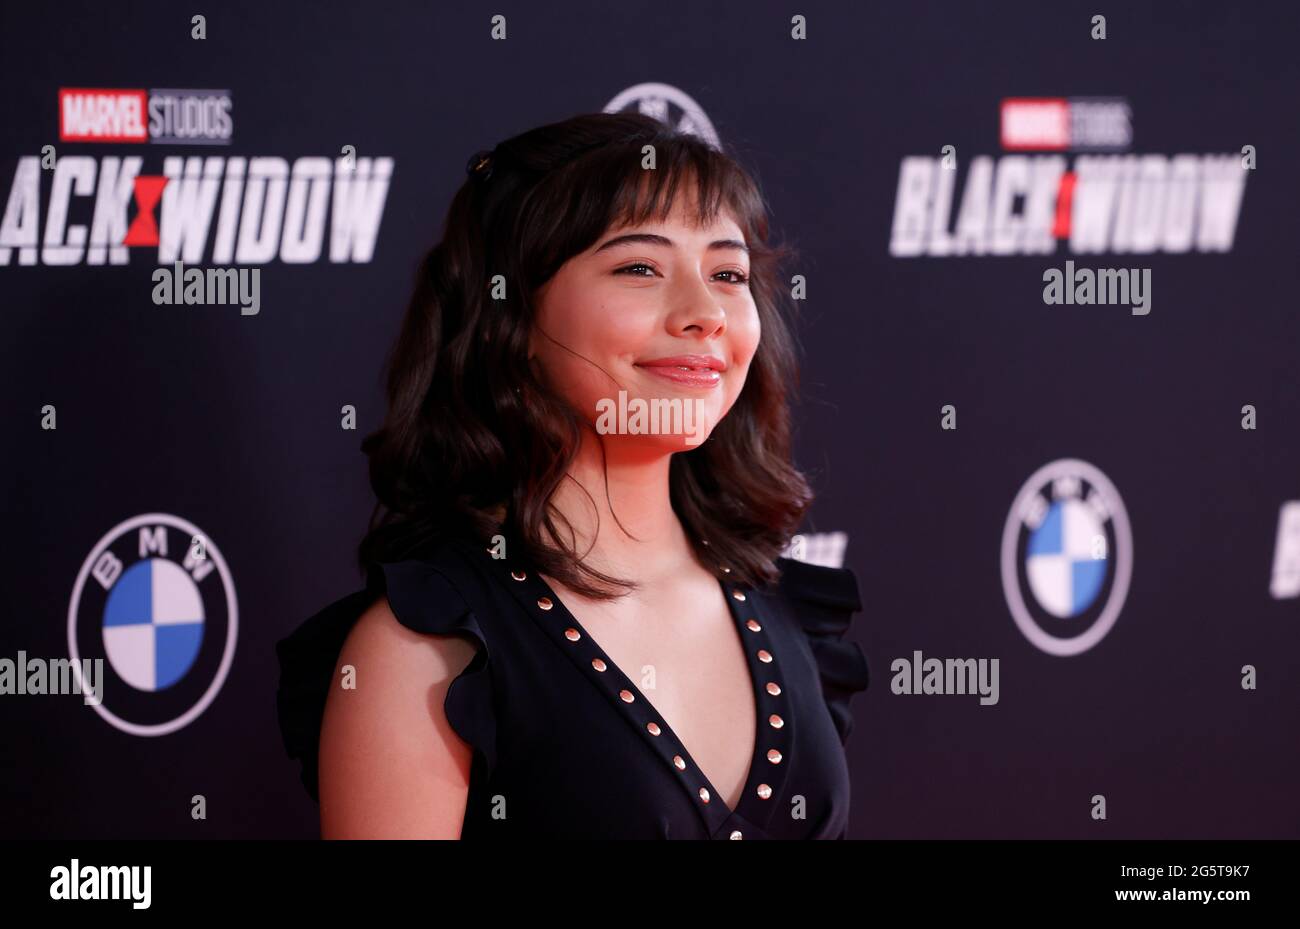 Actor Xochitl Gomez poses as she attends a fan event and special screening of the film 'Black Widow' at El Capitan theatre in Los Angeles, California, U.S., June 29, 2021. REUTERS/Mario Anzuoni Stock Photo